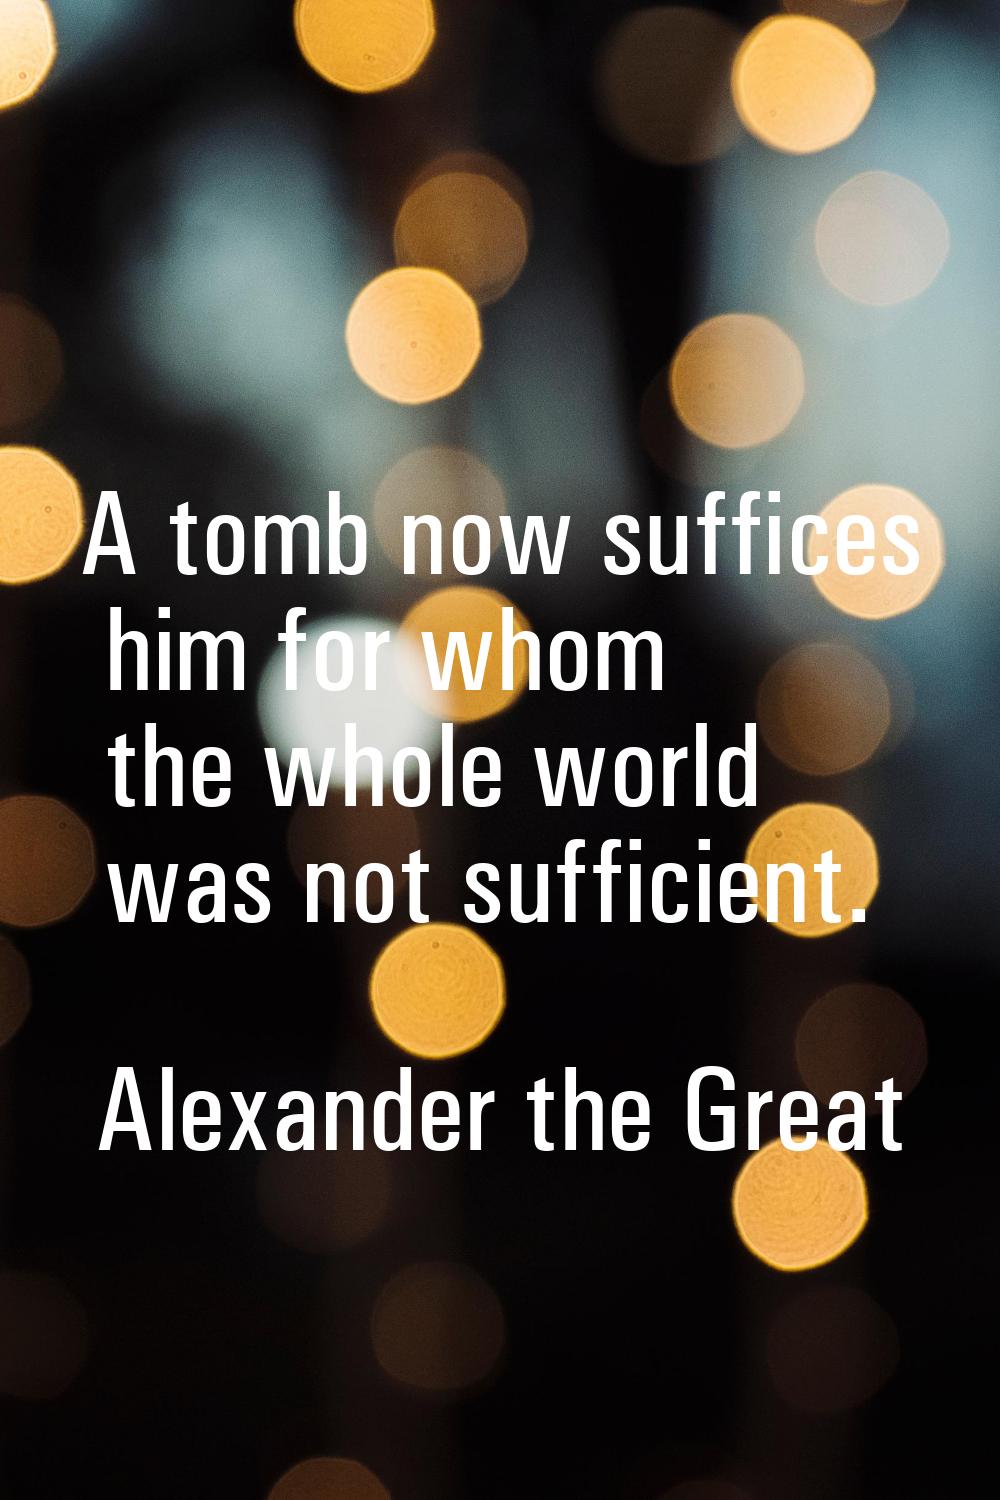 A tomb now suffices him for whom the whole world was not sufficient.